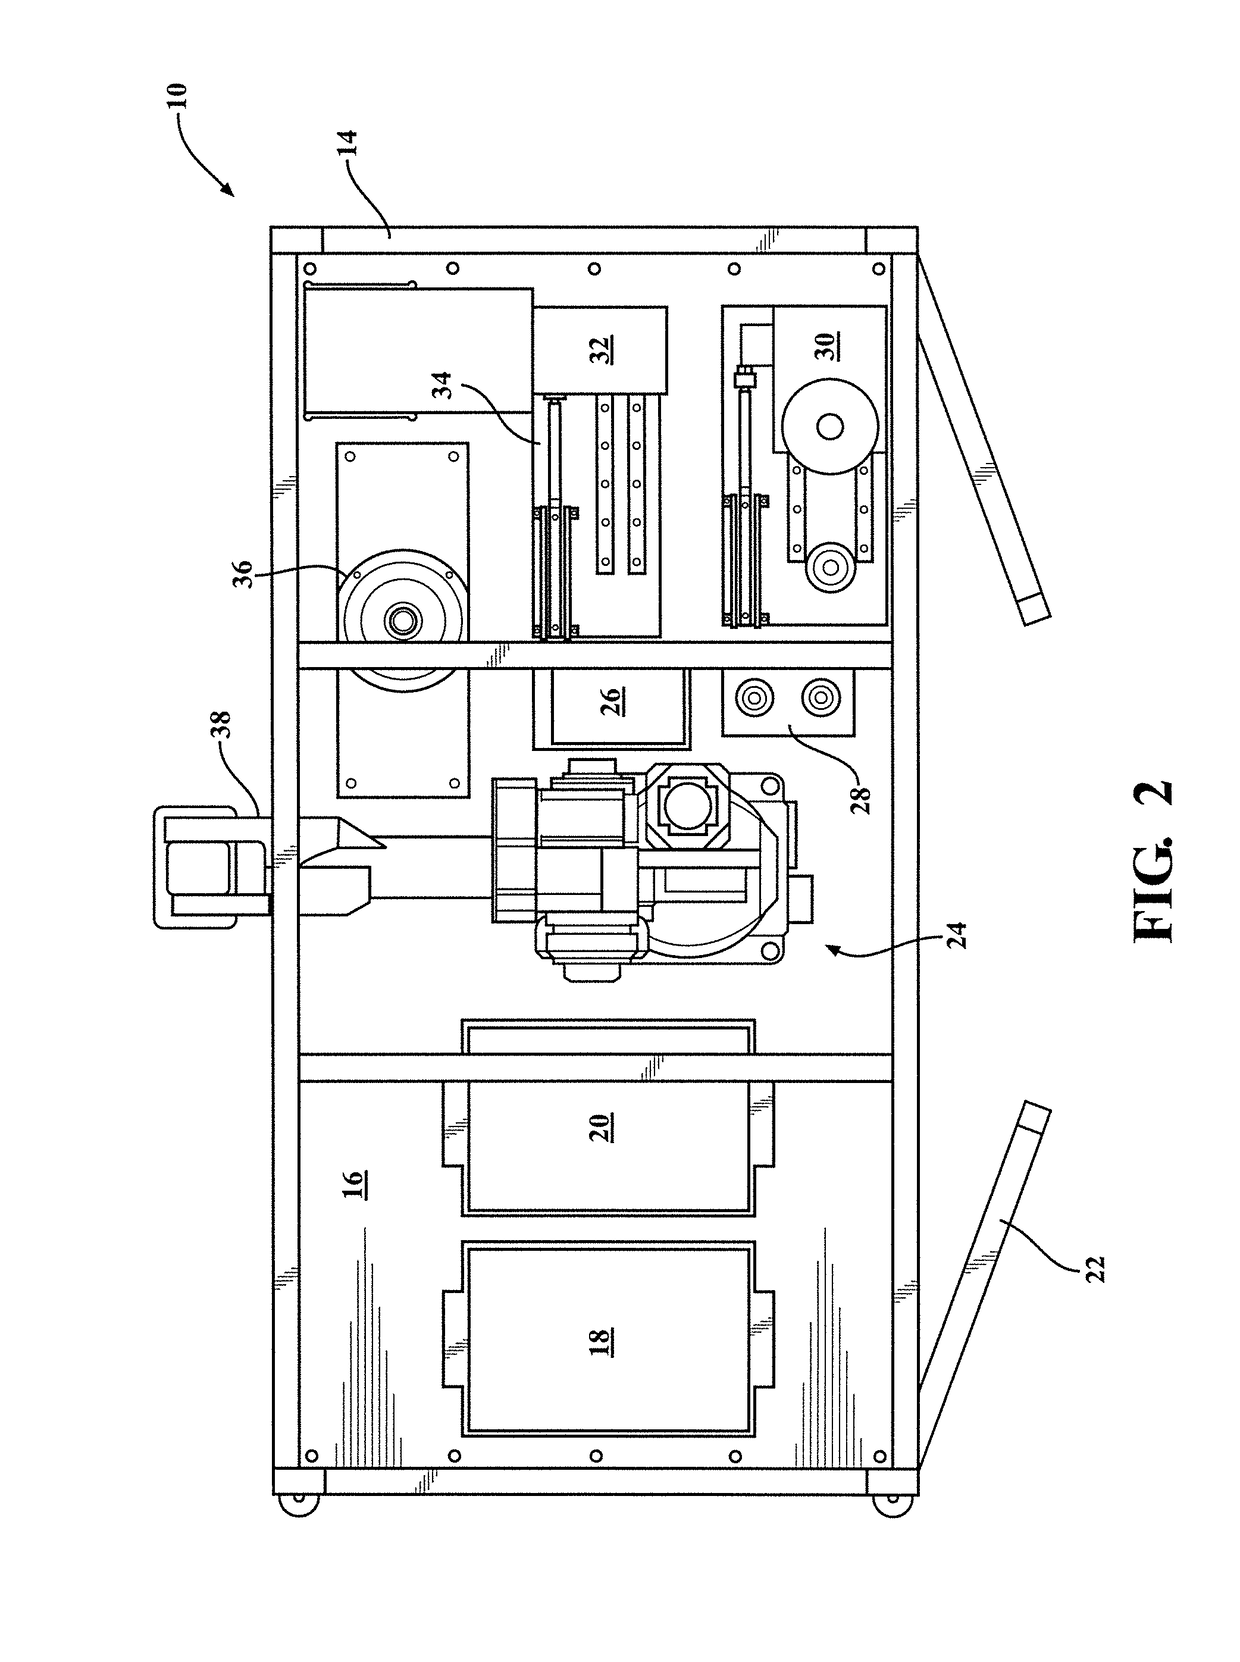 Flexible automation cell for performing secondary operations in concert with a machining center and roll check operations